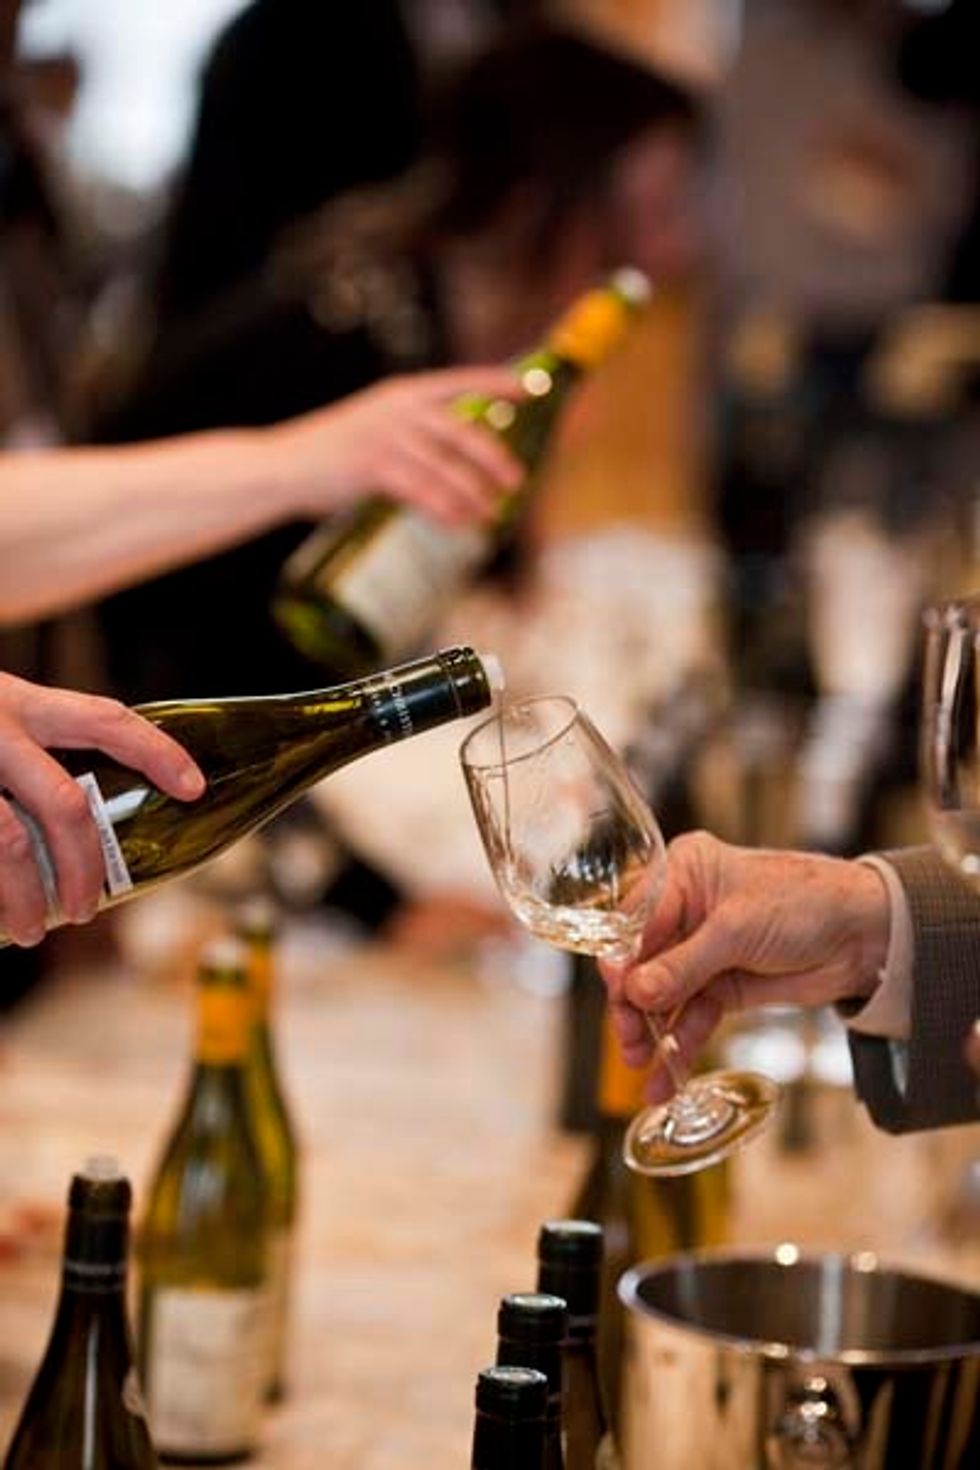 The French Wine Event of the Year Arrives in SF